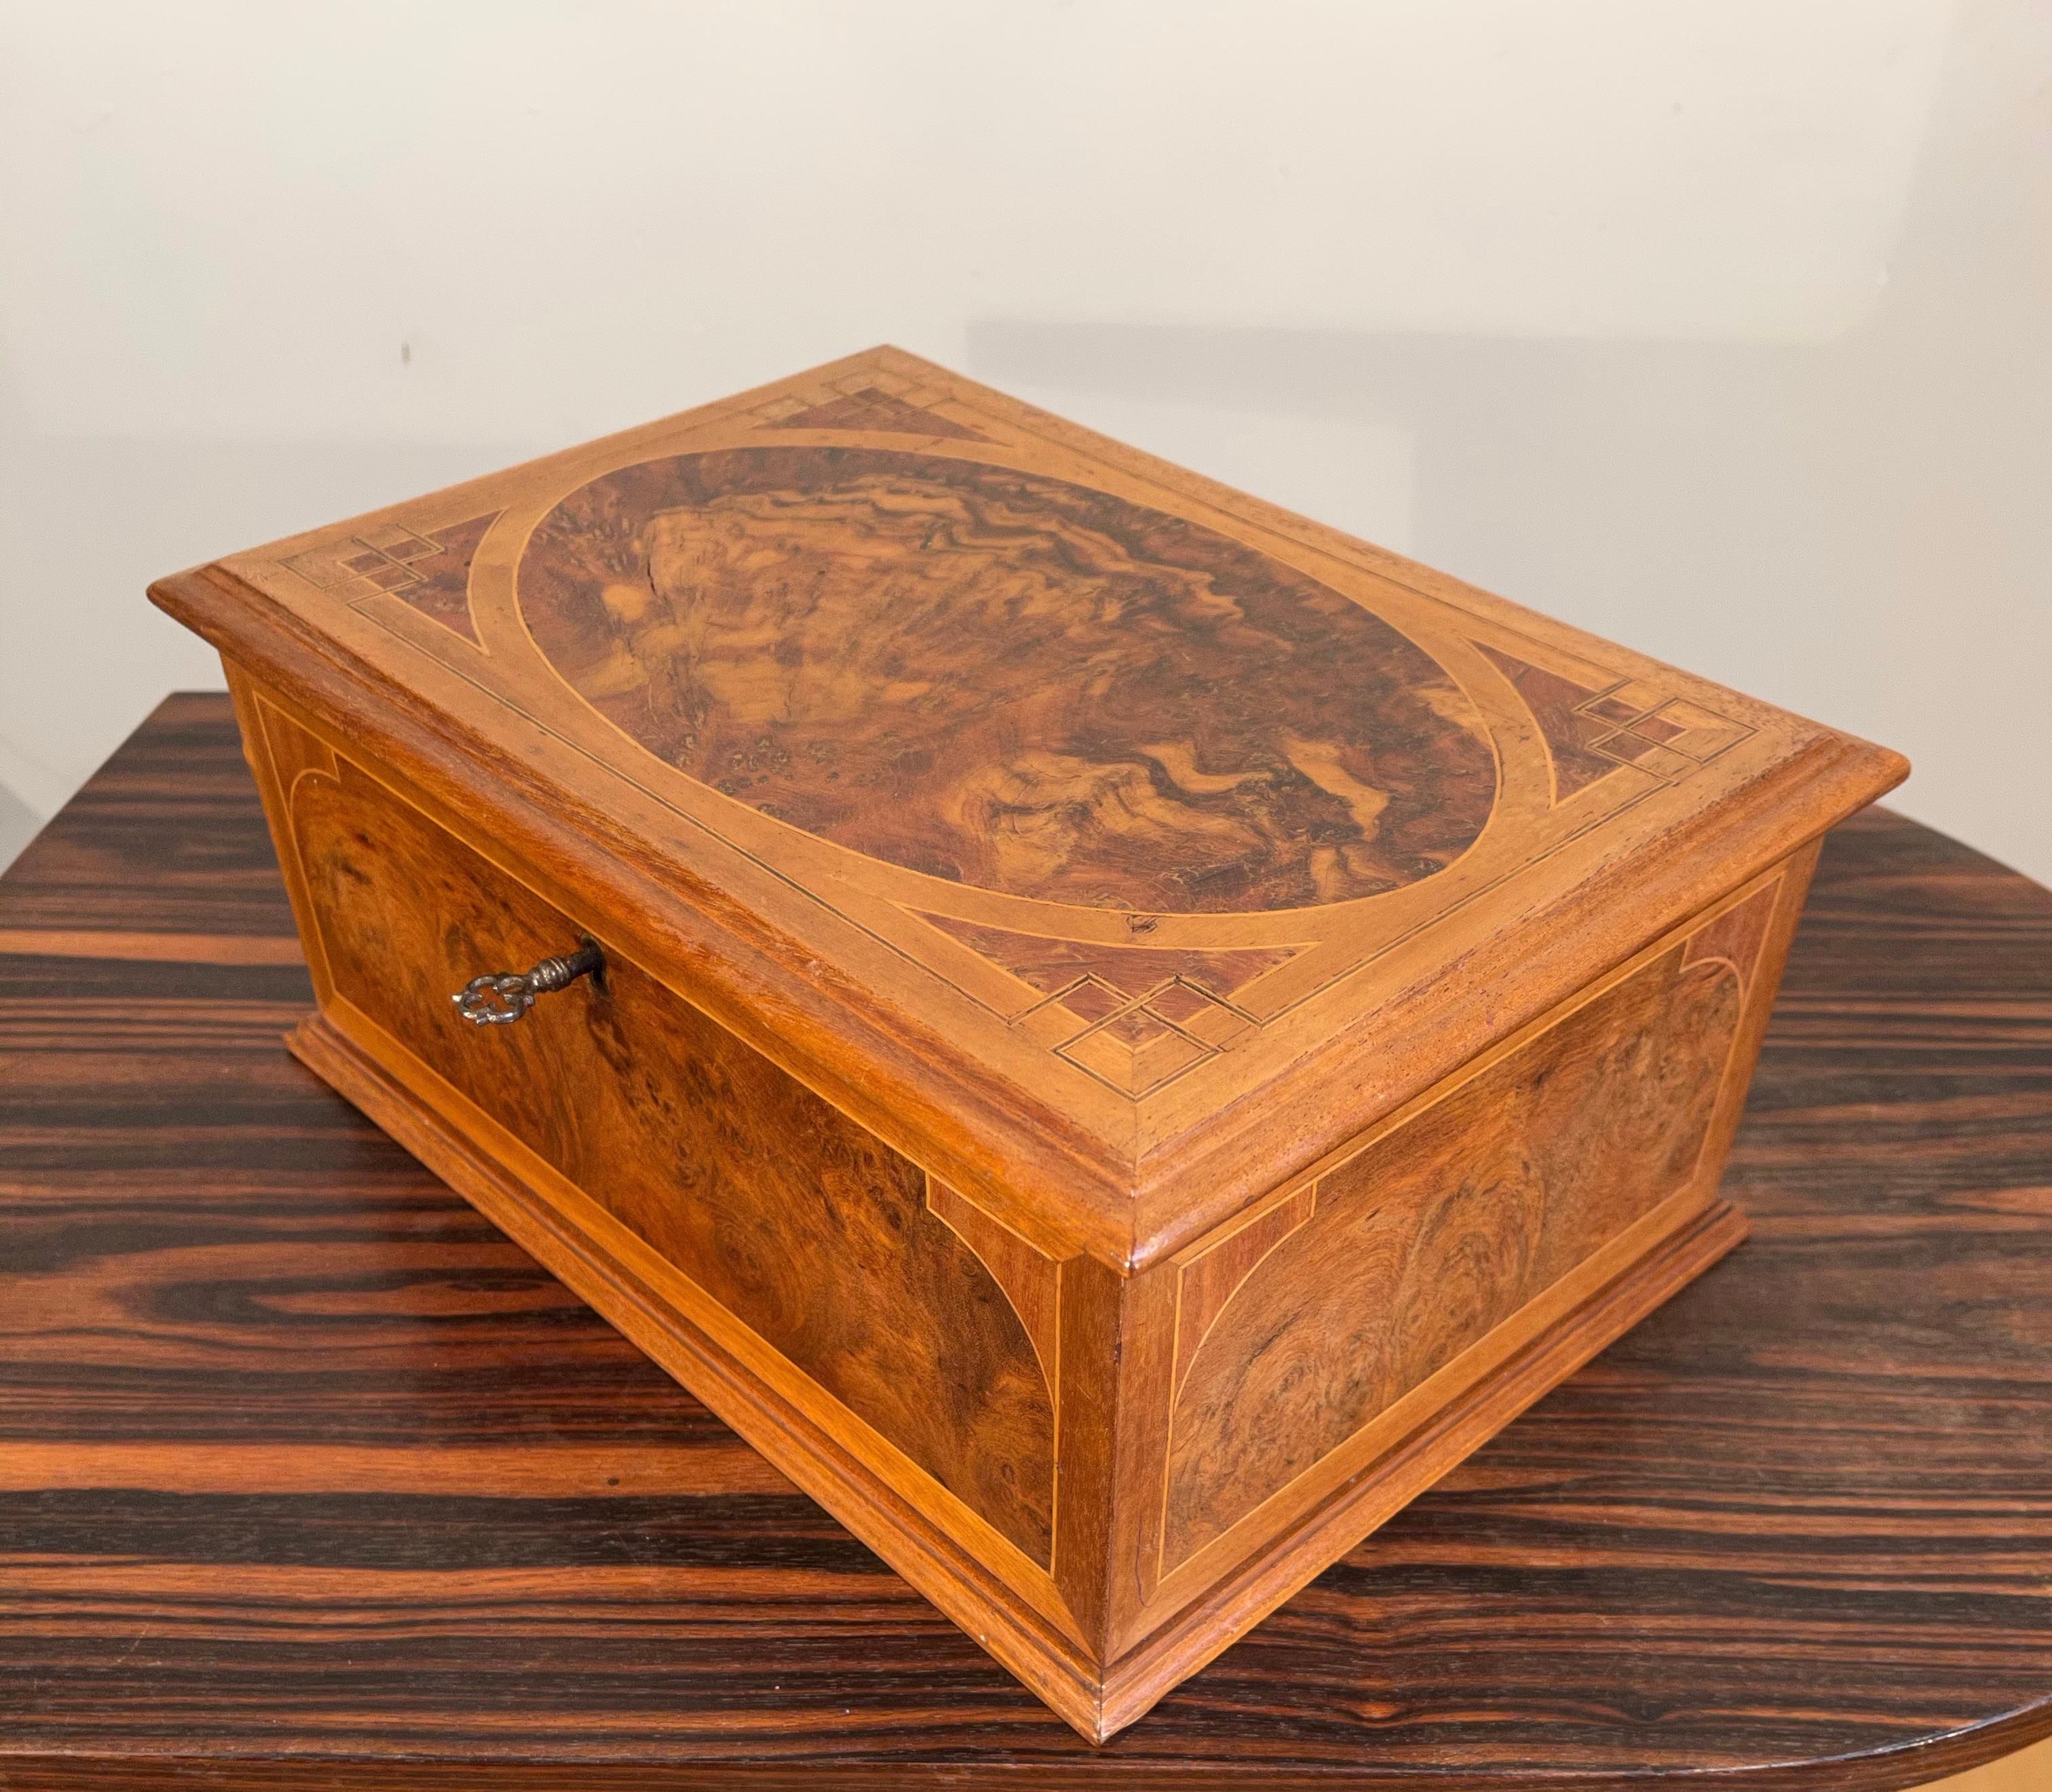 Great craftsmanship with a great Patina from the early 1900s inlaid with Wood and other woodtypes.

If you are looking for a stylish and truly decorative box to grace your table or dresser then this antique gem could be yours to own and enjoy soon.